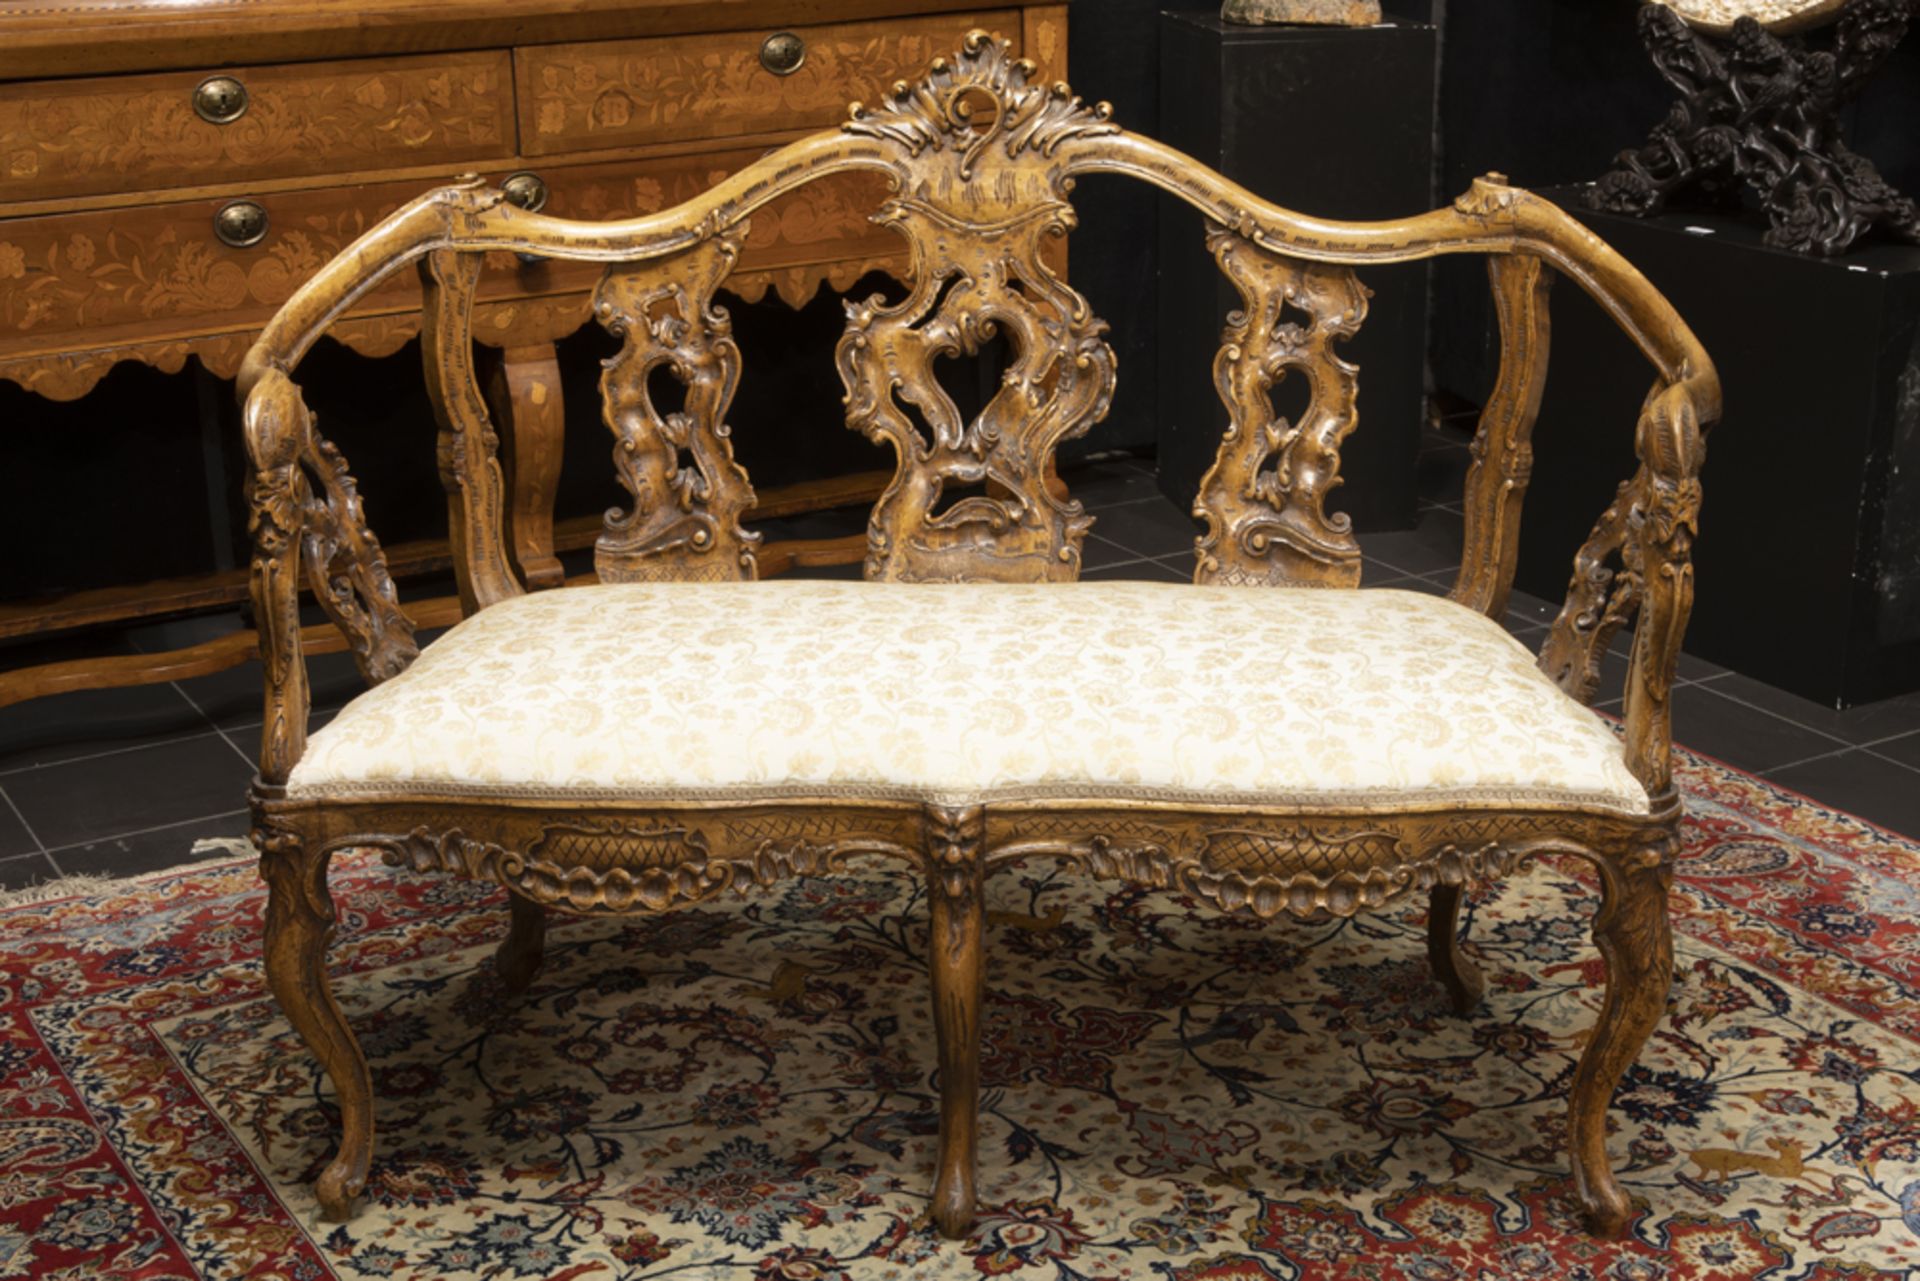 18th Cent. north Italian 3pc rococo style salon suite with an elegant design in walnut with very - Image 3 of 3